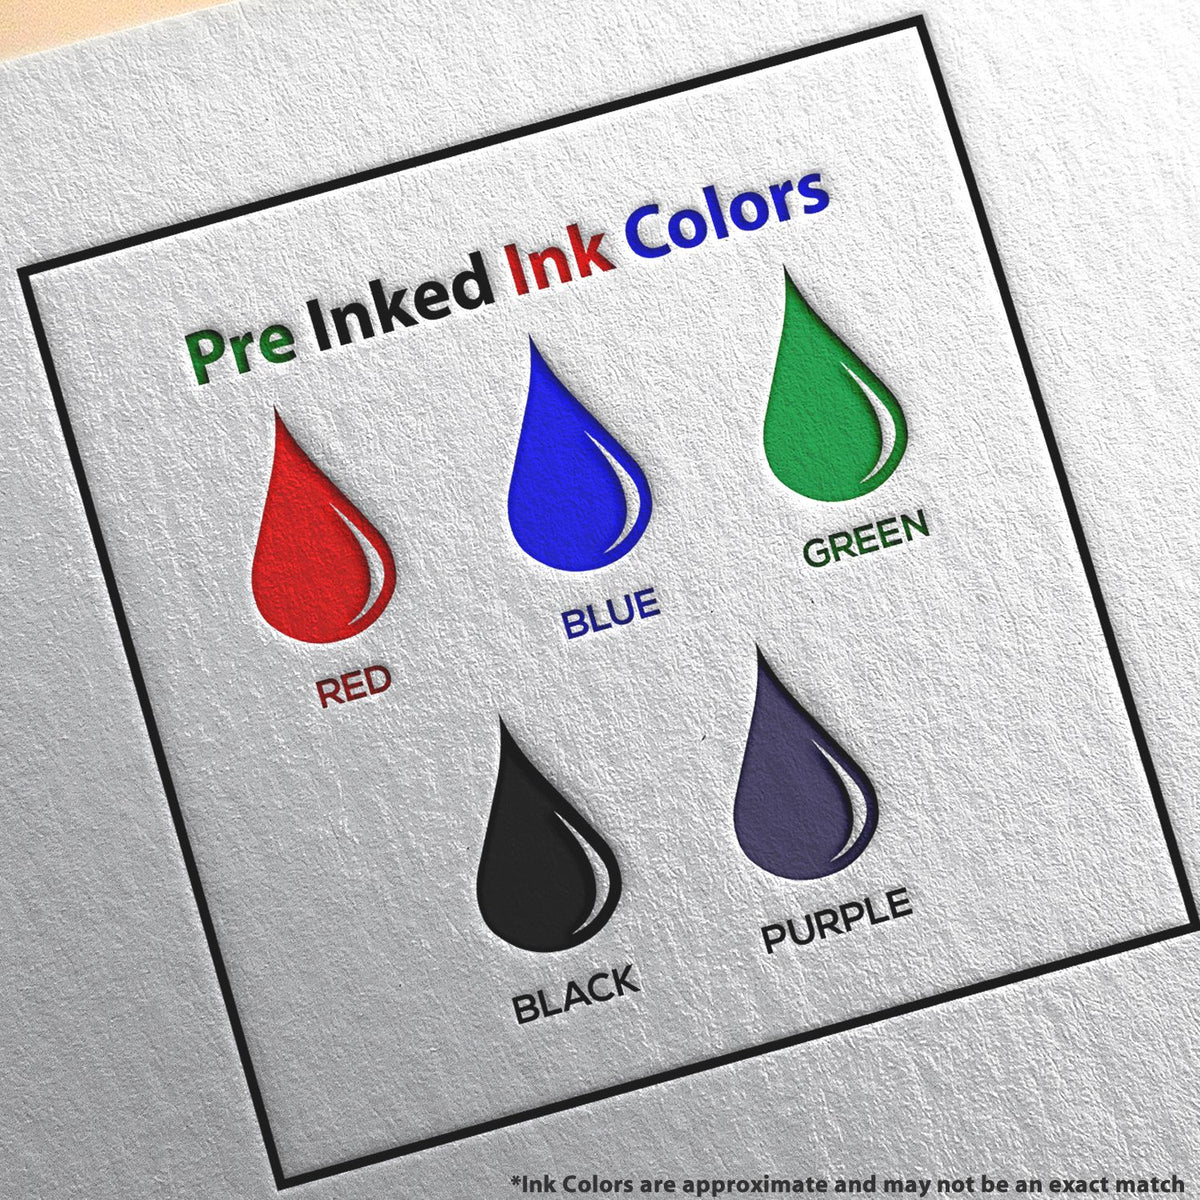 A picture showing the different ink colors or hues available for the Slim Pre-Inked Rectangular Notary Stamp for Pennsylvania product.